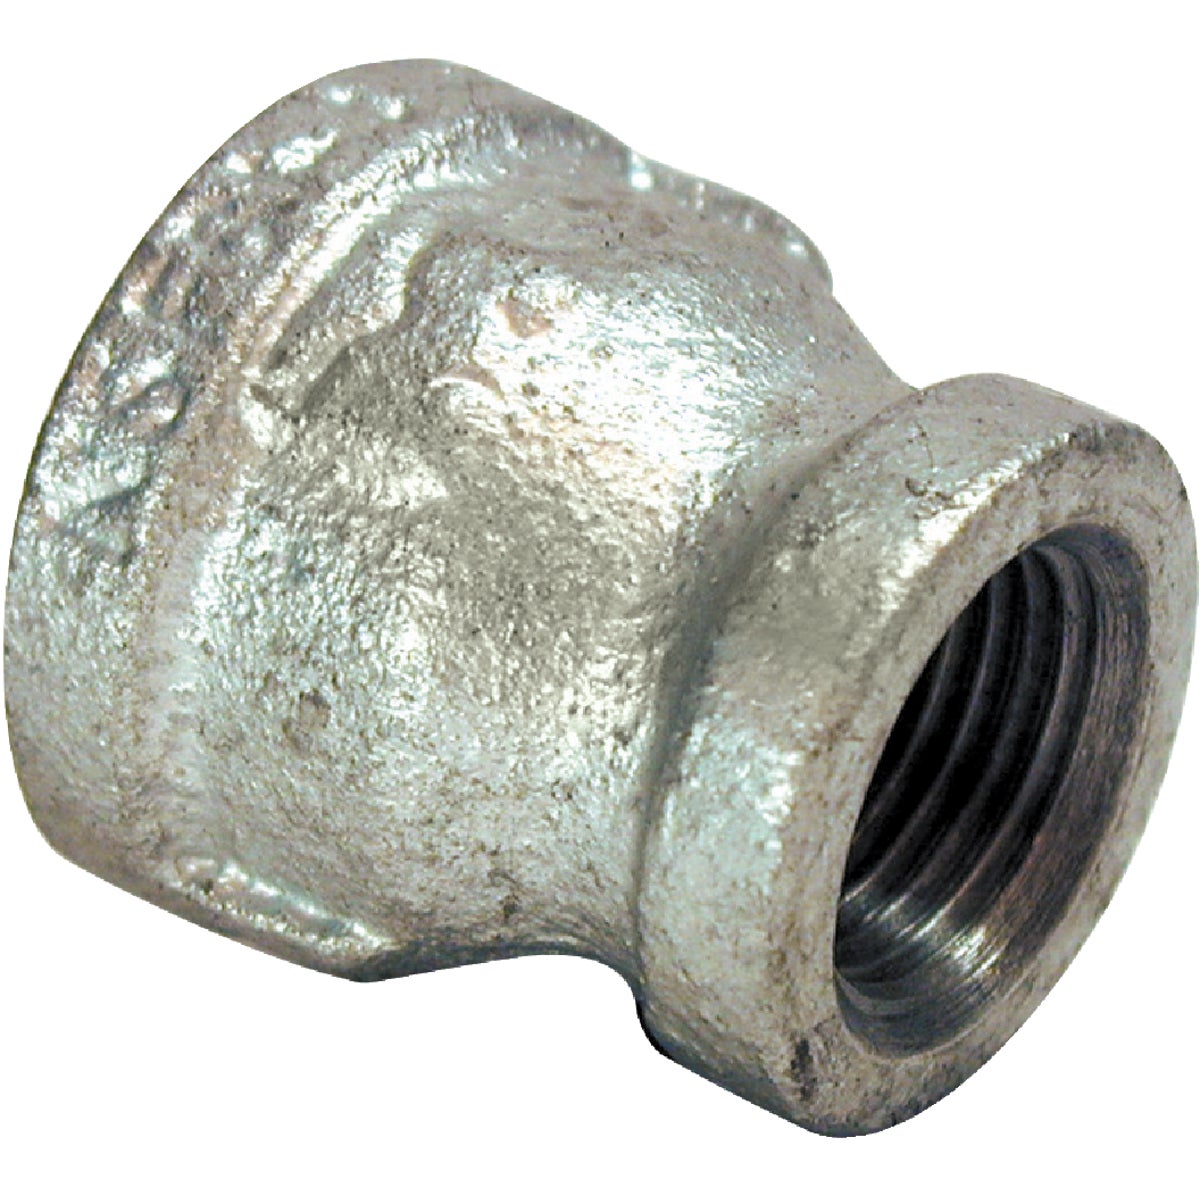 Southland 1/2 In. x 3/8 In. FPT Reducing Galvanized Coupling